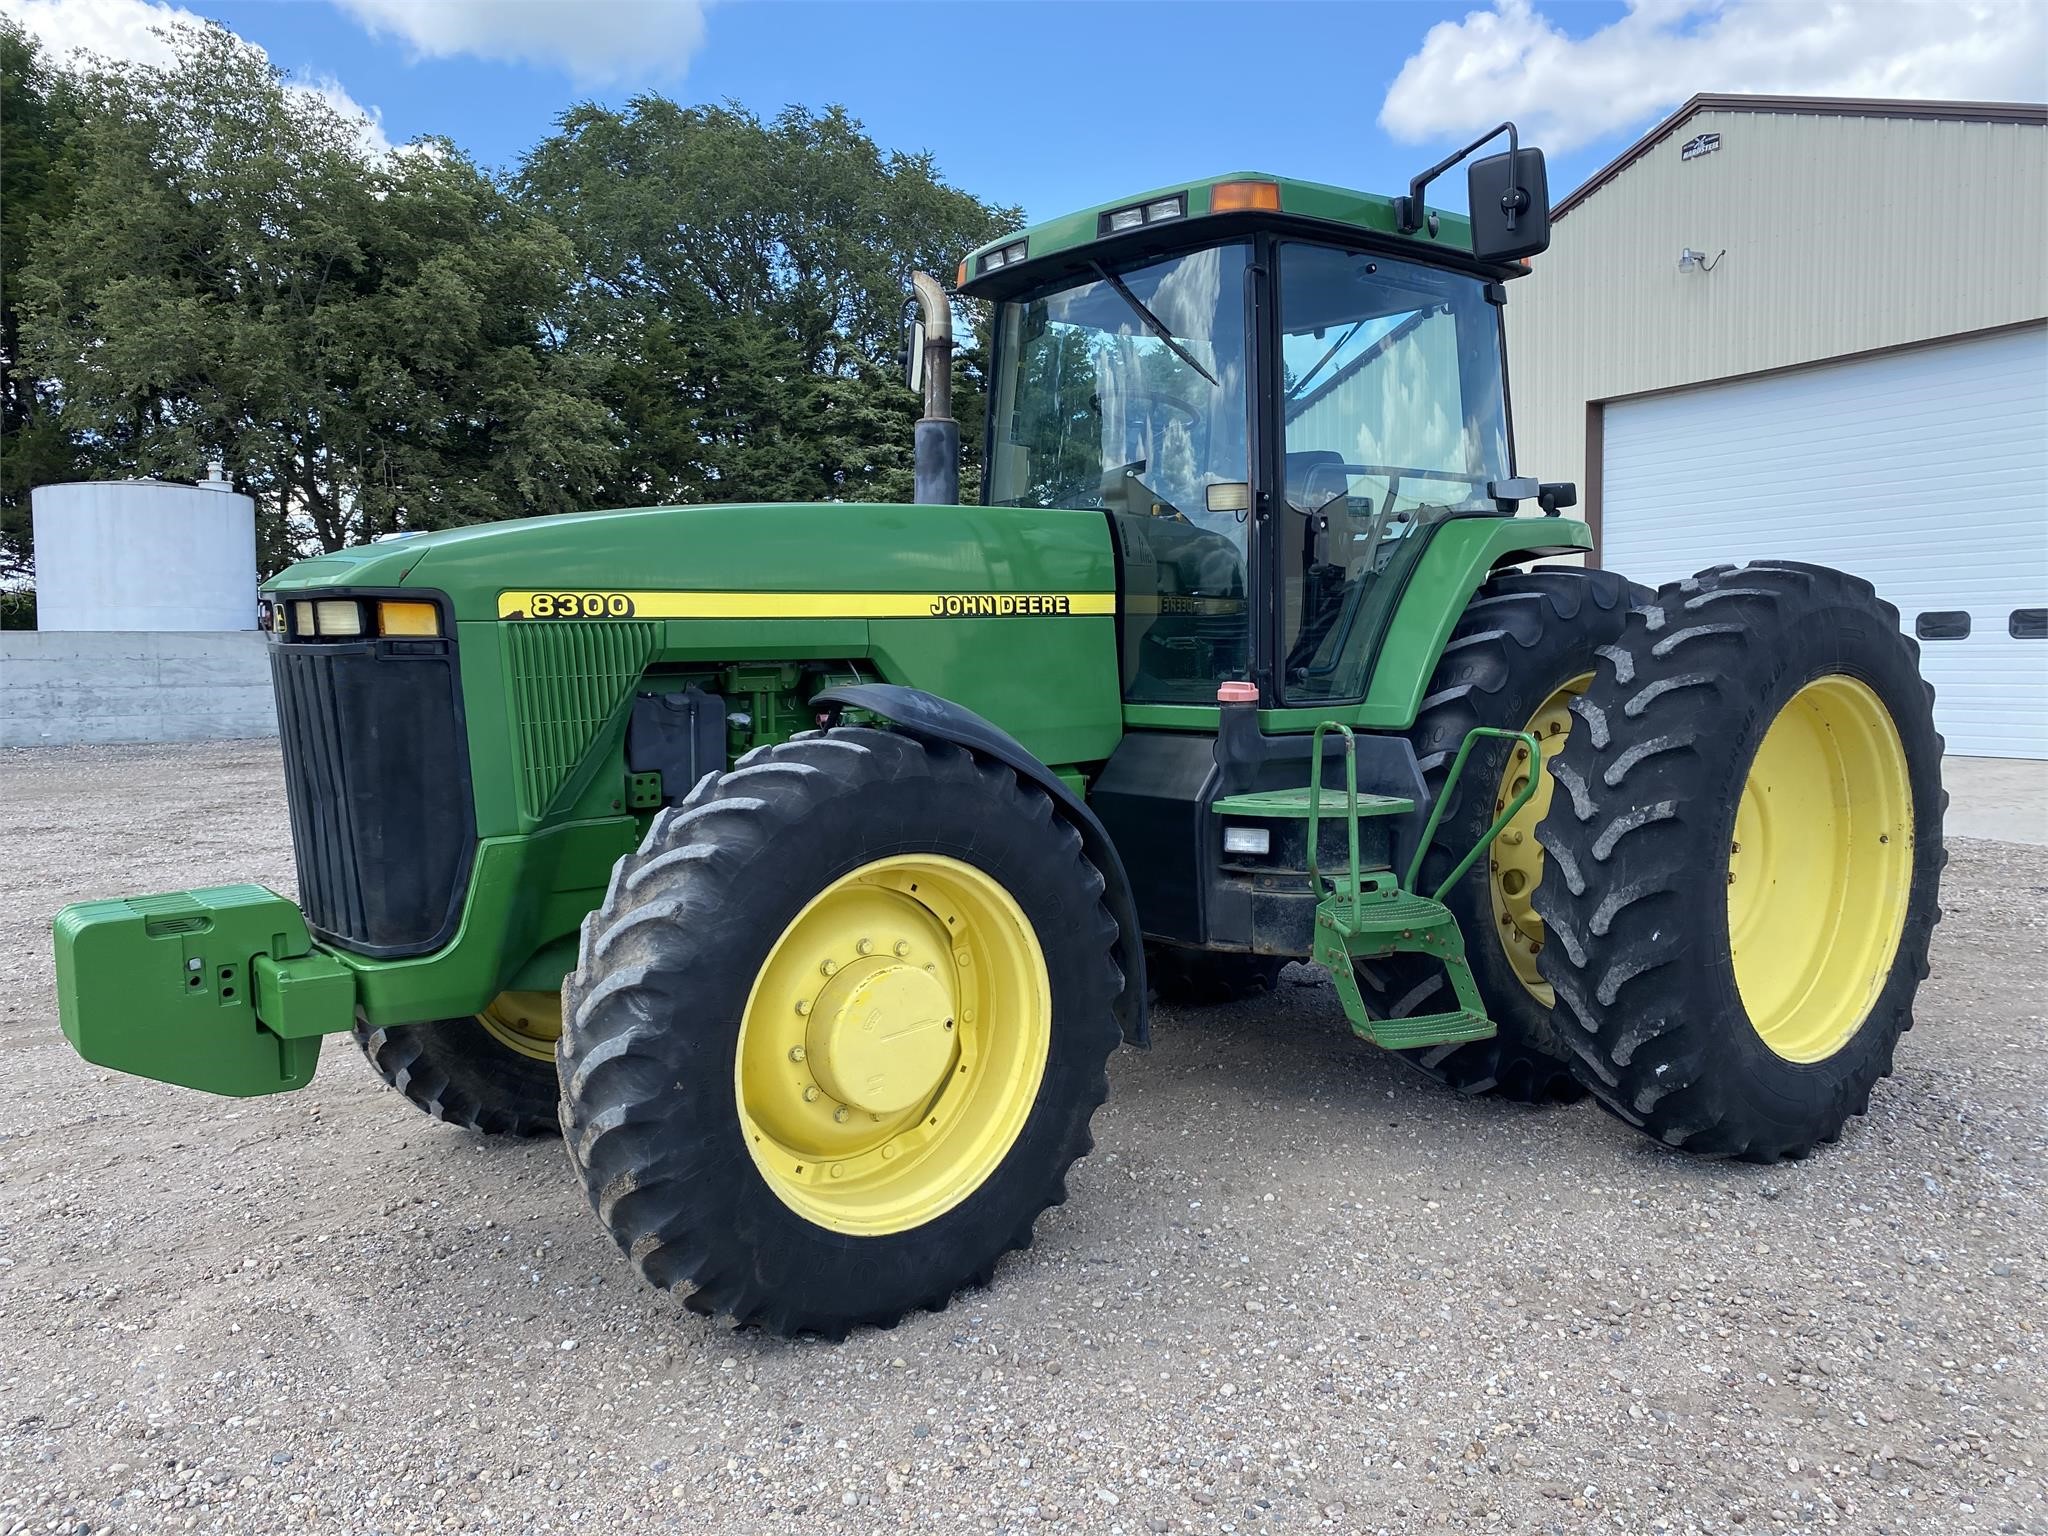 John Deere 00 Auction Results 53 Listings Auctiontime Com Page 1 Of 3